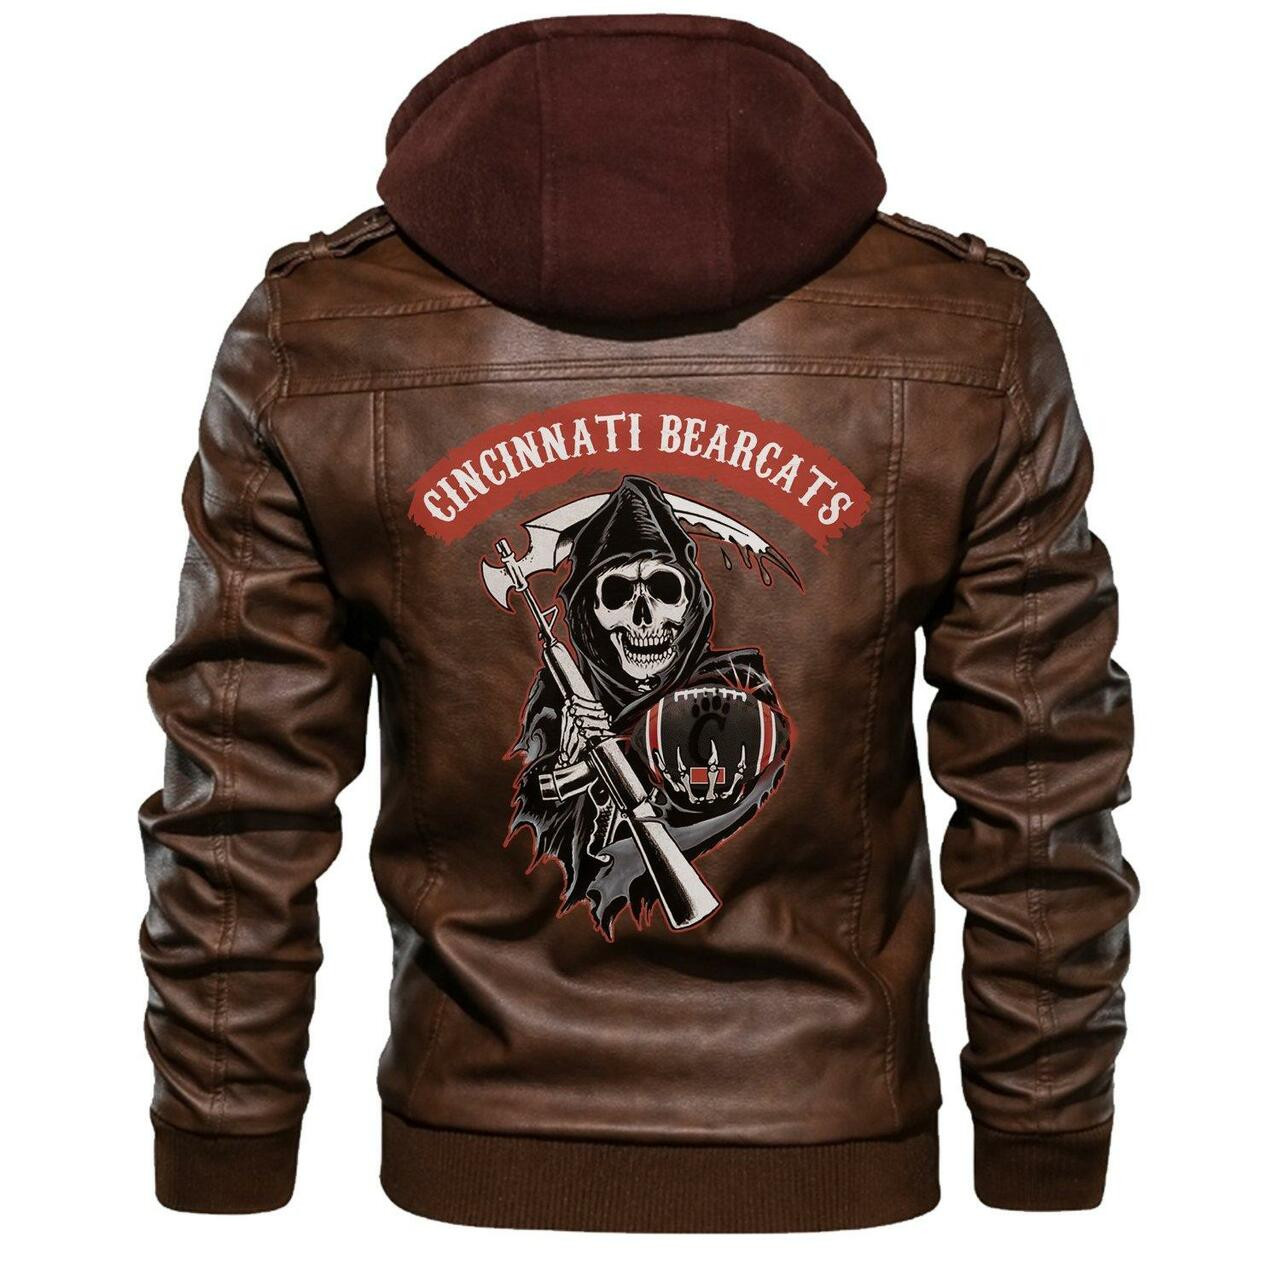 Don't wait another minute, Get Hot Leather Jacket today 108